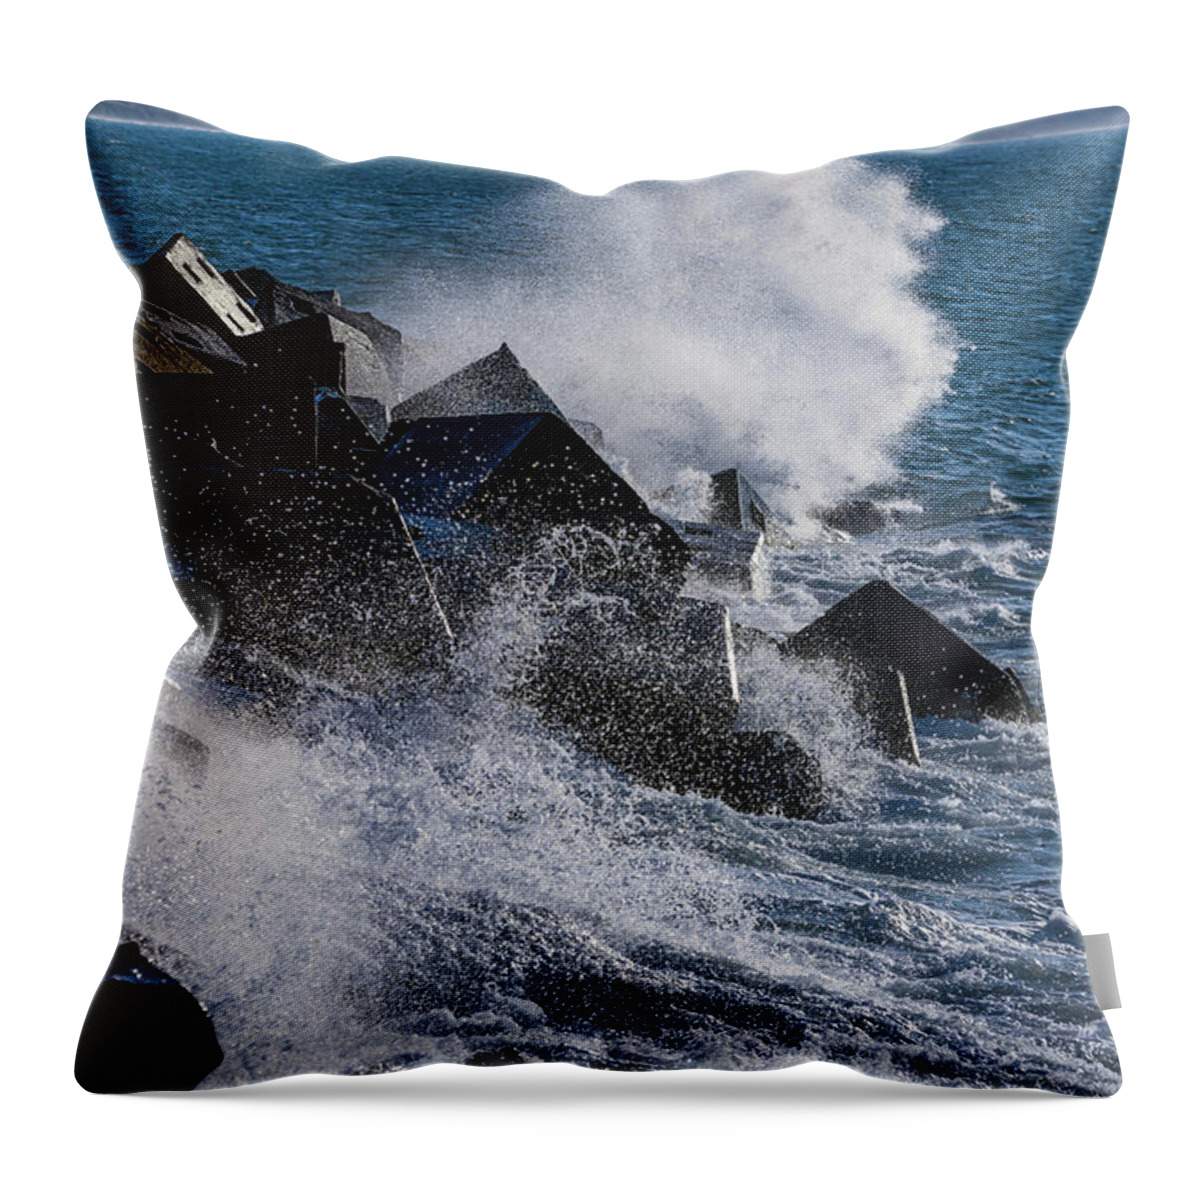 Scenics Throw Pillow featuring the photograph Wave by Omersukrugoksu